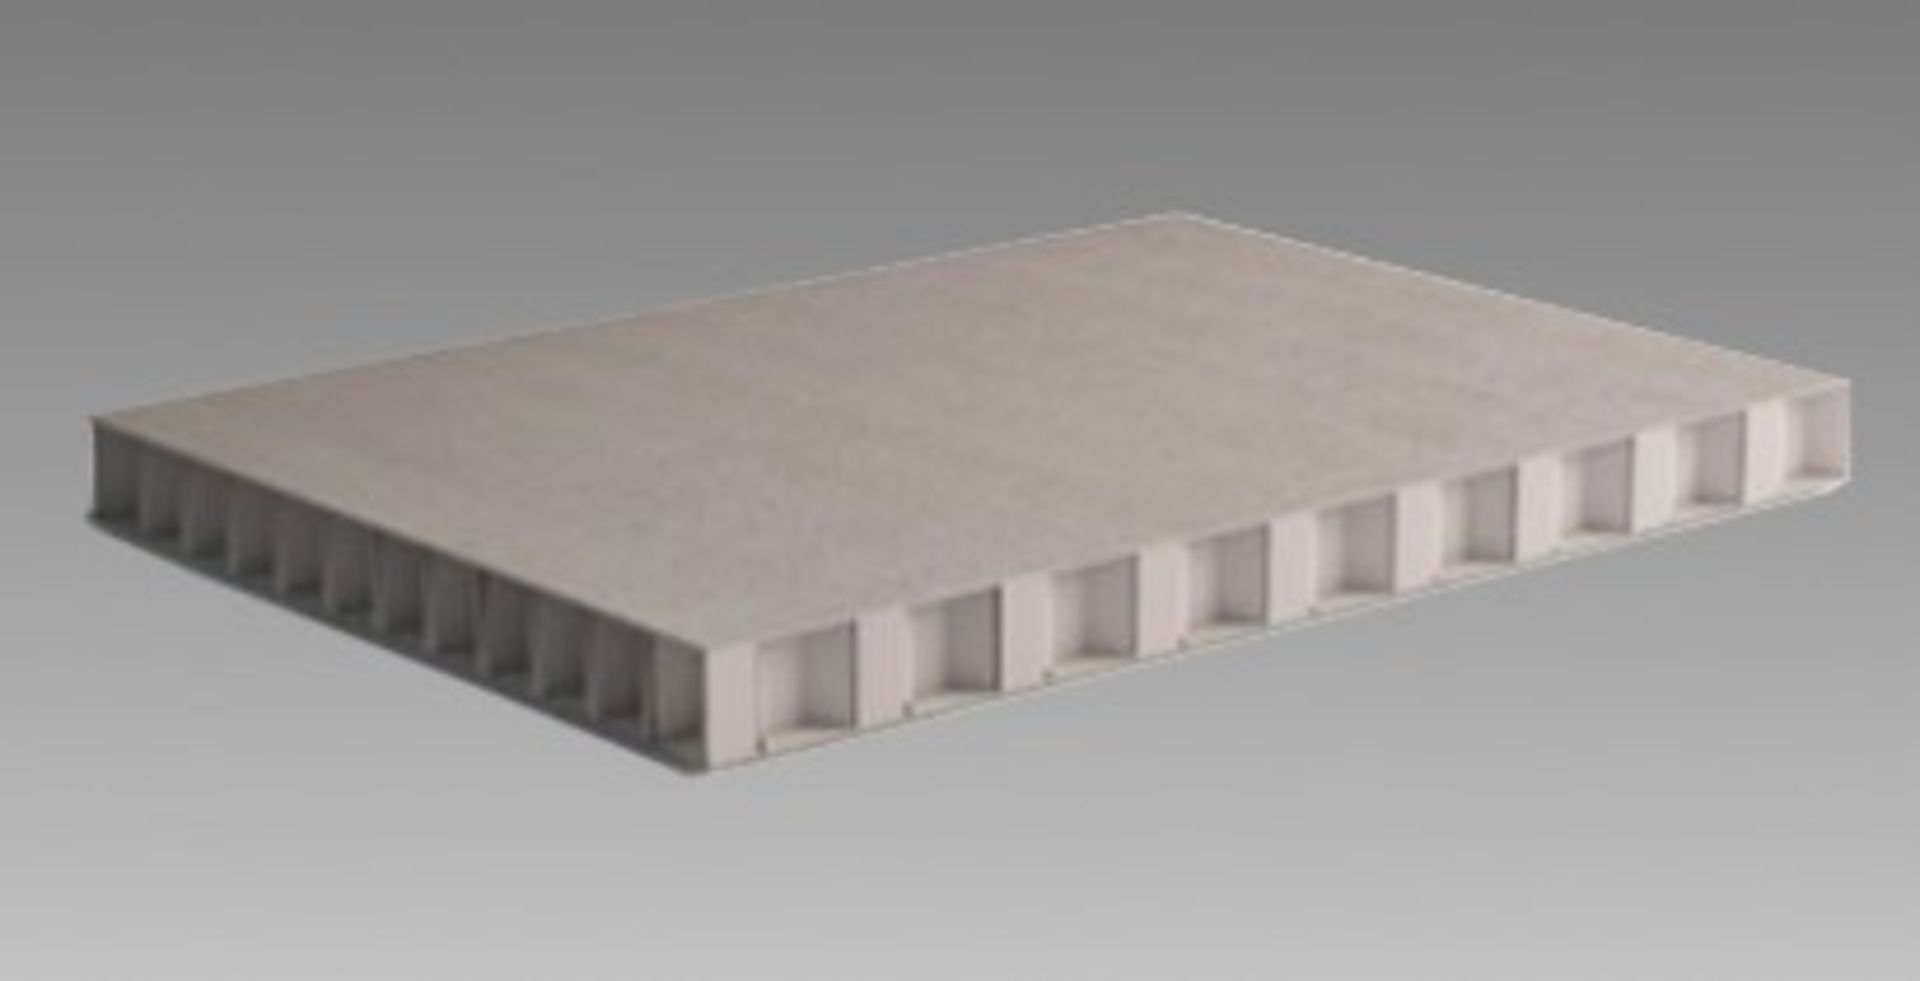 24 x ThermHex Thermoplastic Honeycomb Core Panels - Size 693 x 1210 x 18mm - New Stock - Lightweight